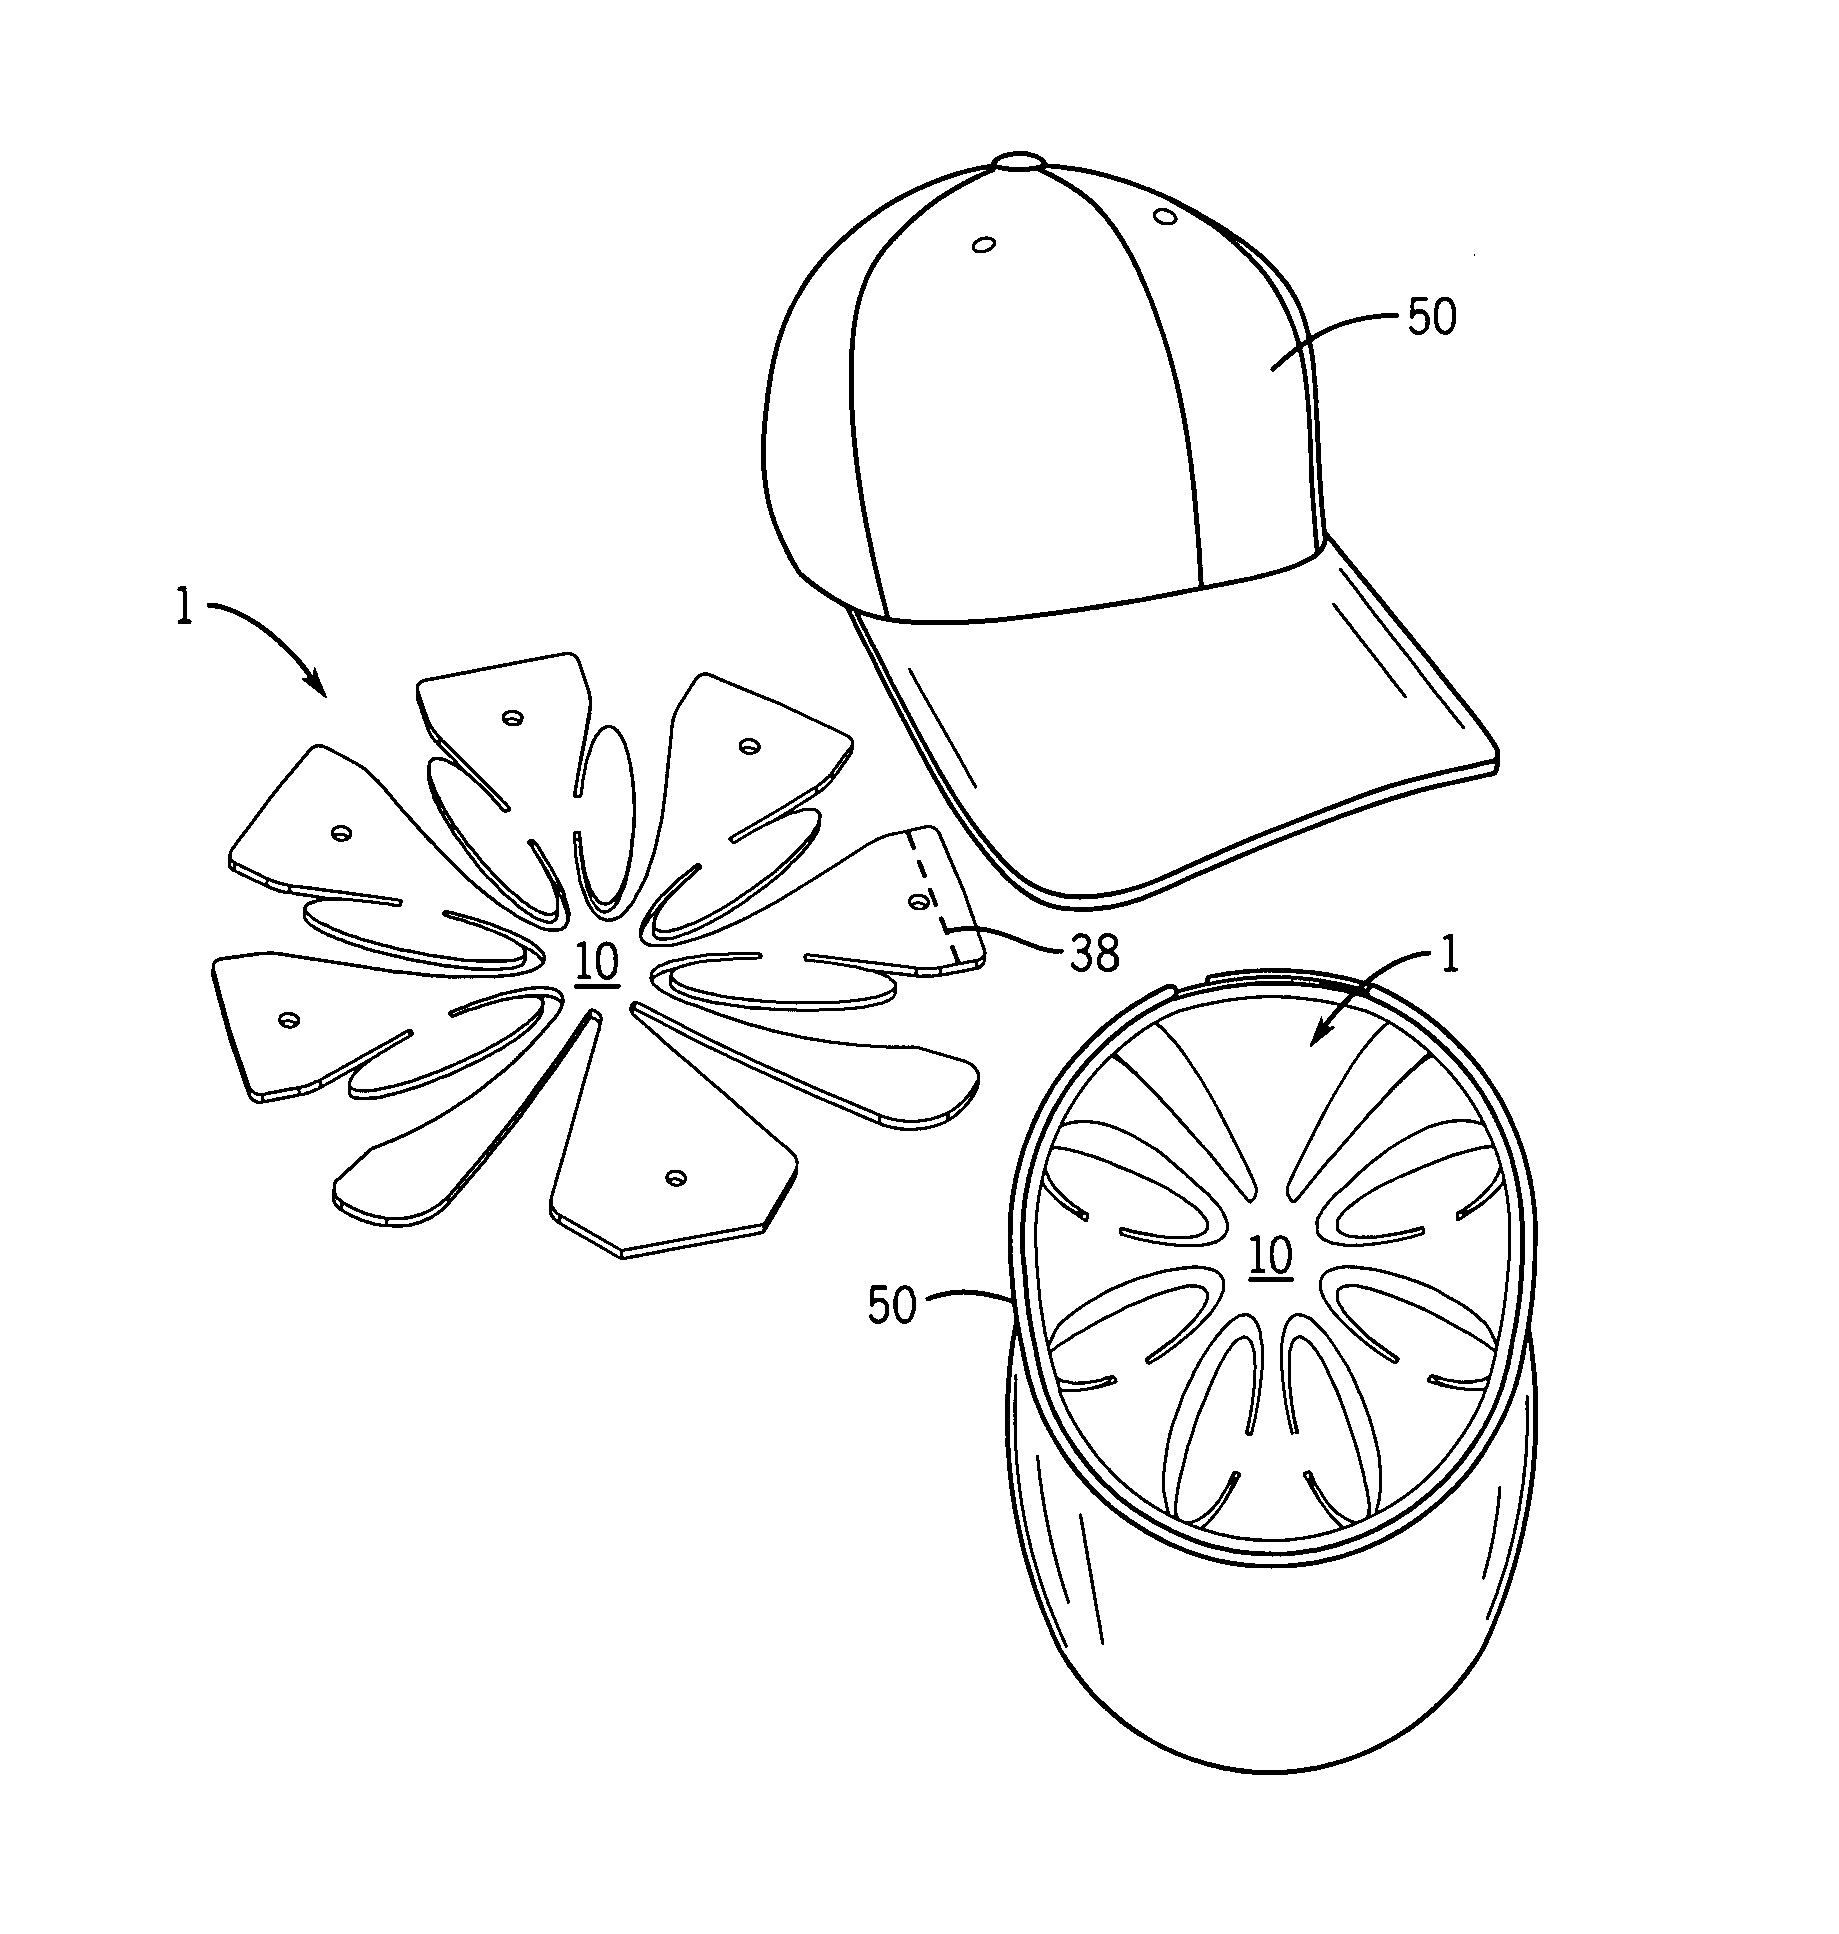 Device for providing protection against minor head injury and for stabilizing a hat